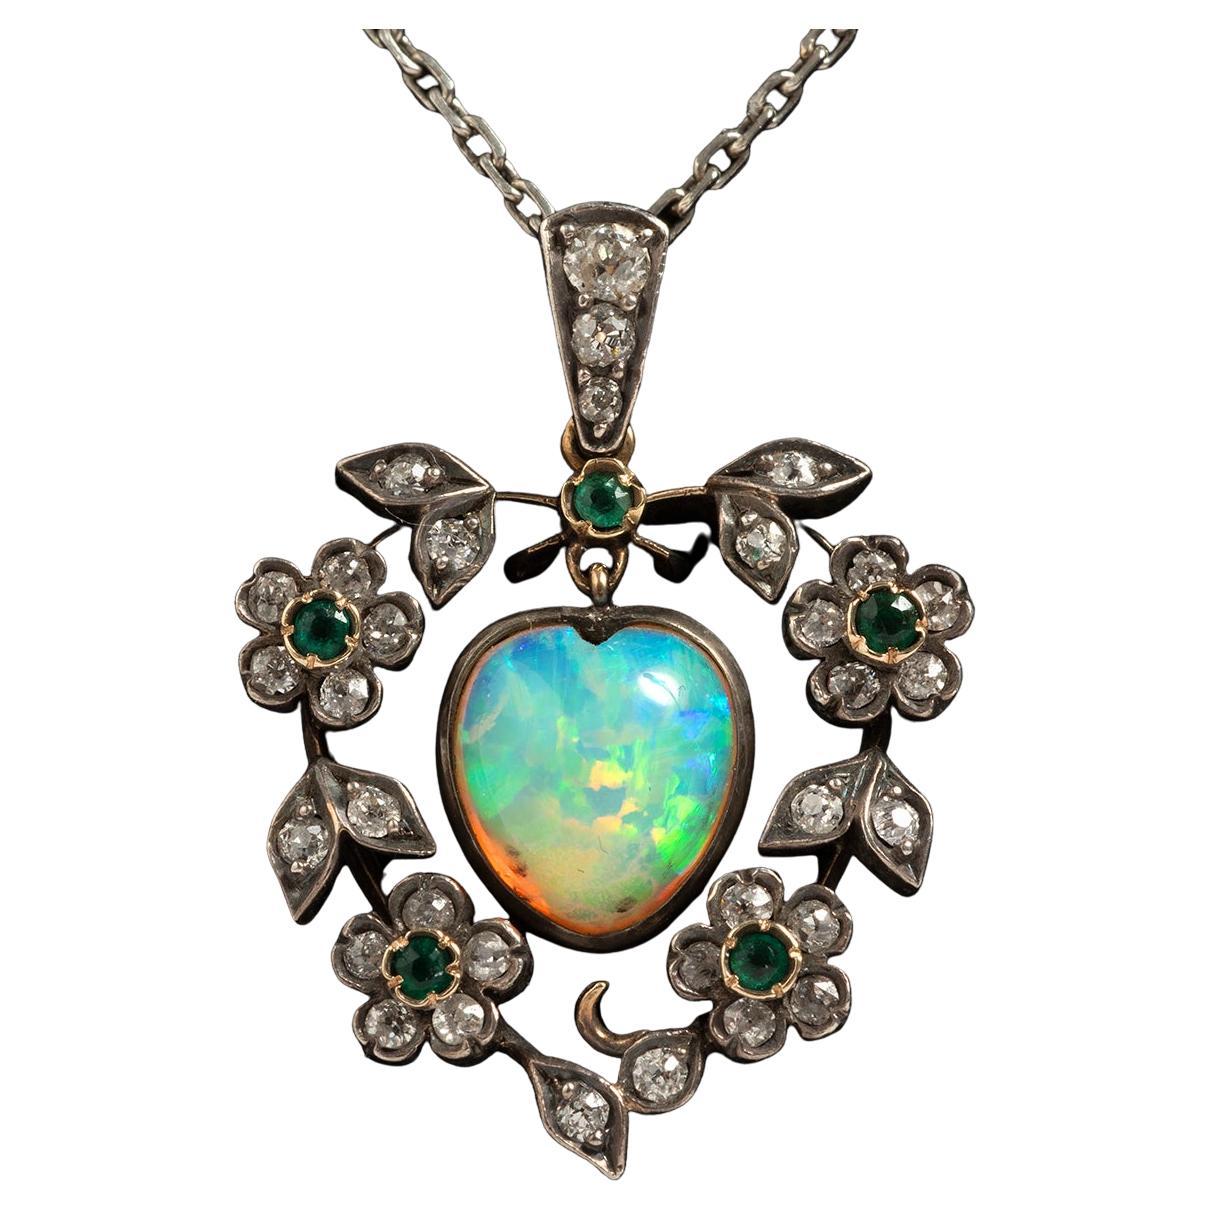 Victorian 18 Carat White Gold Necklace with Diamonds, Emeralds and Opal Stone.